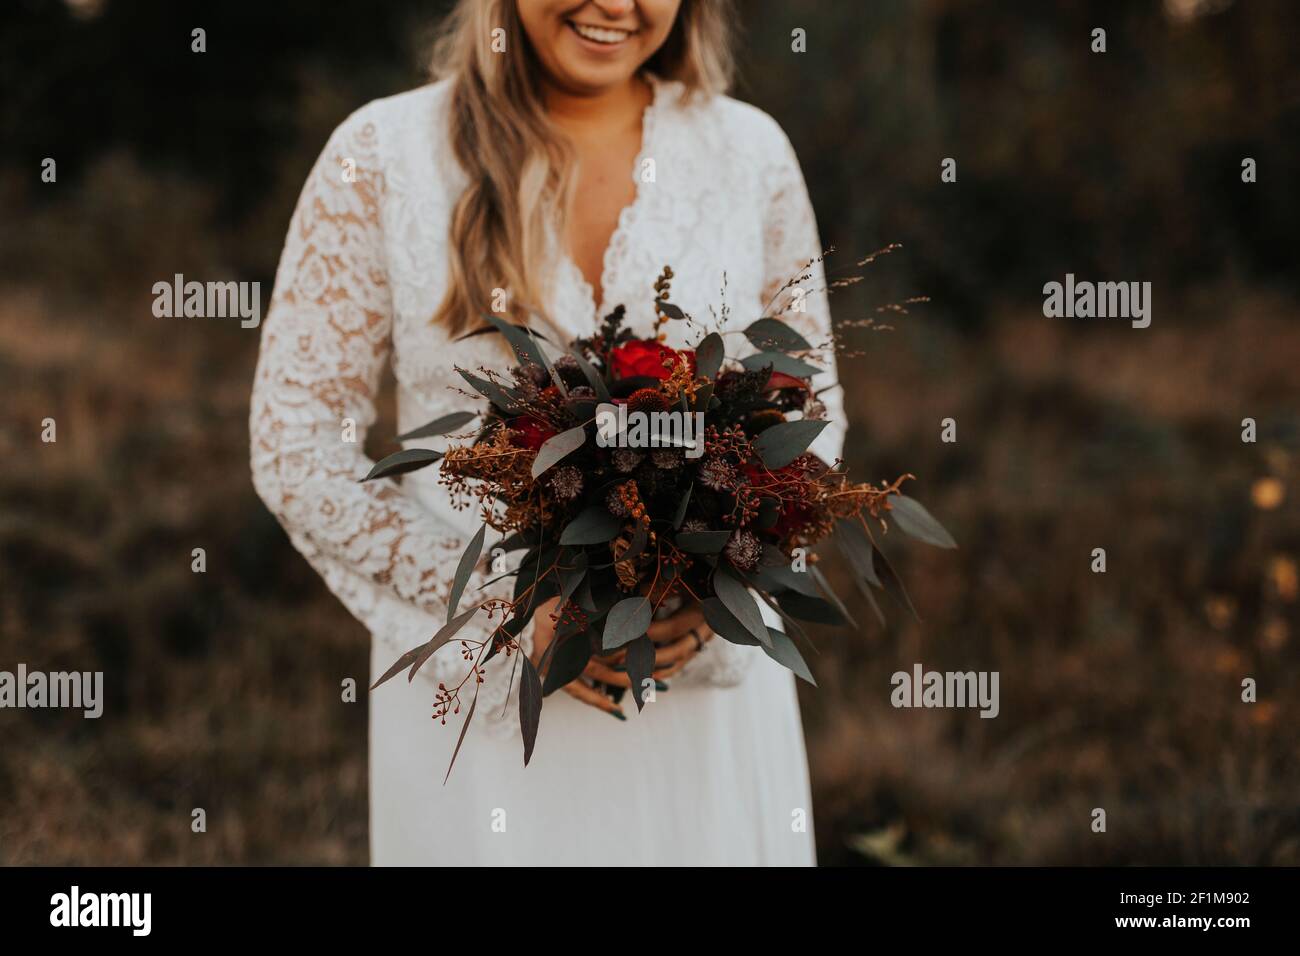 Mid section of bride holding wedding bouquet Stock Photo